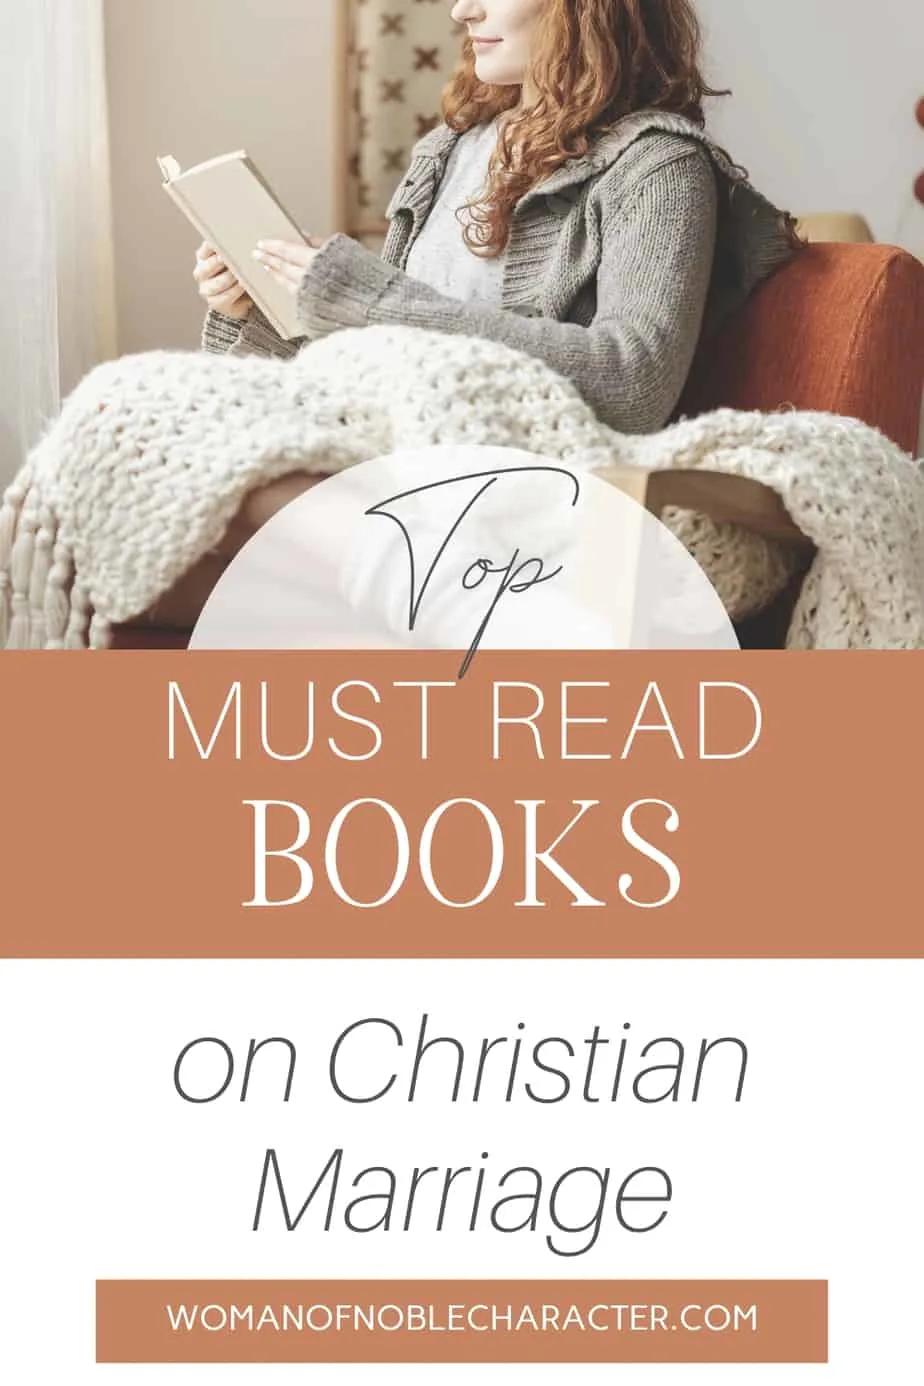 An image of a woman sitting in a chair under a blanket with a book - Books on Christian Marriage